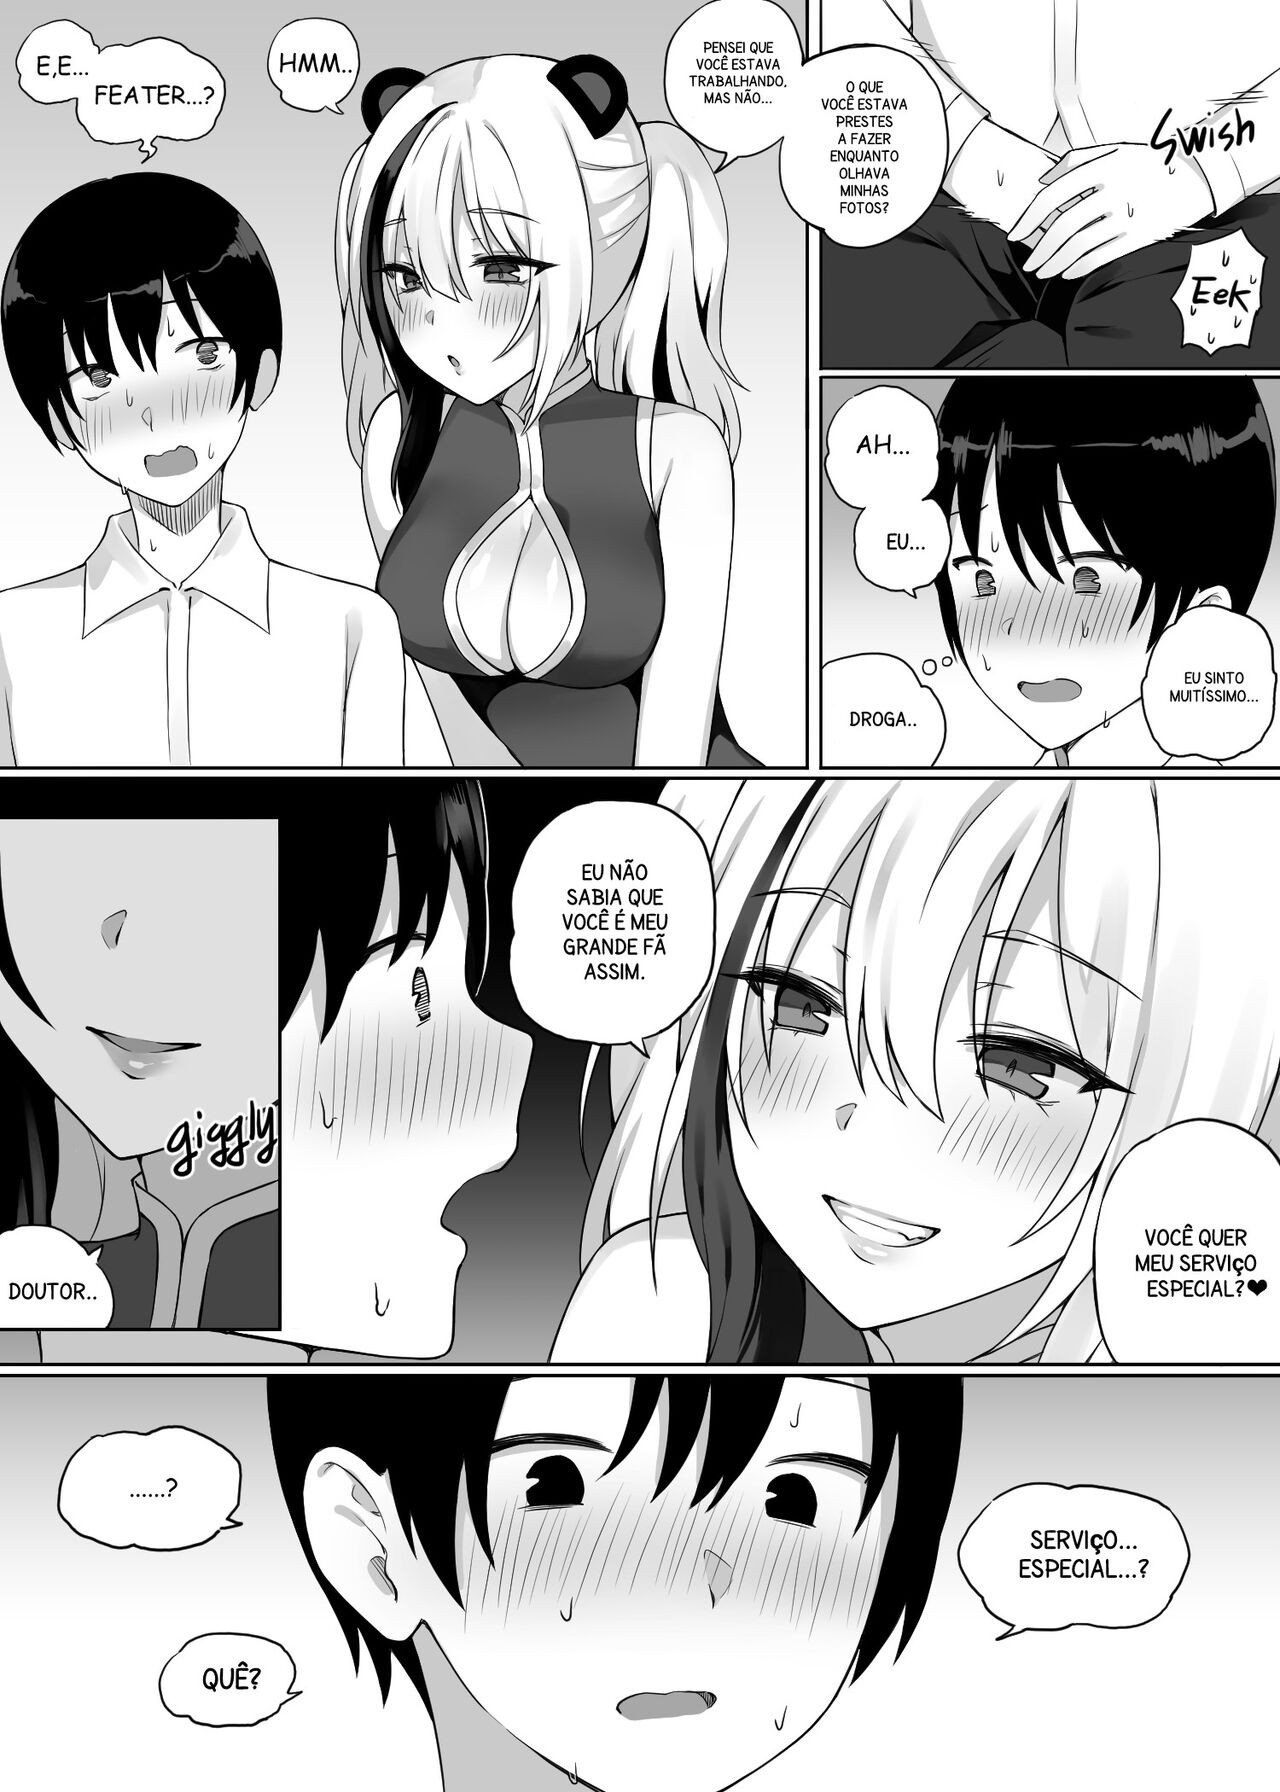 FEater’s Fan Service♥ Hentai pt-br 06